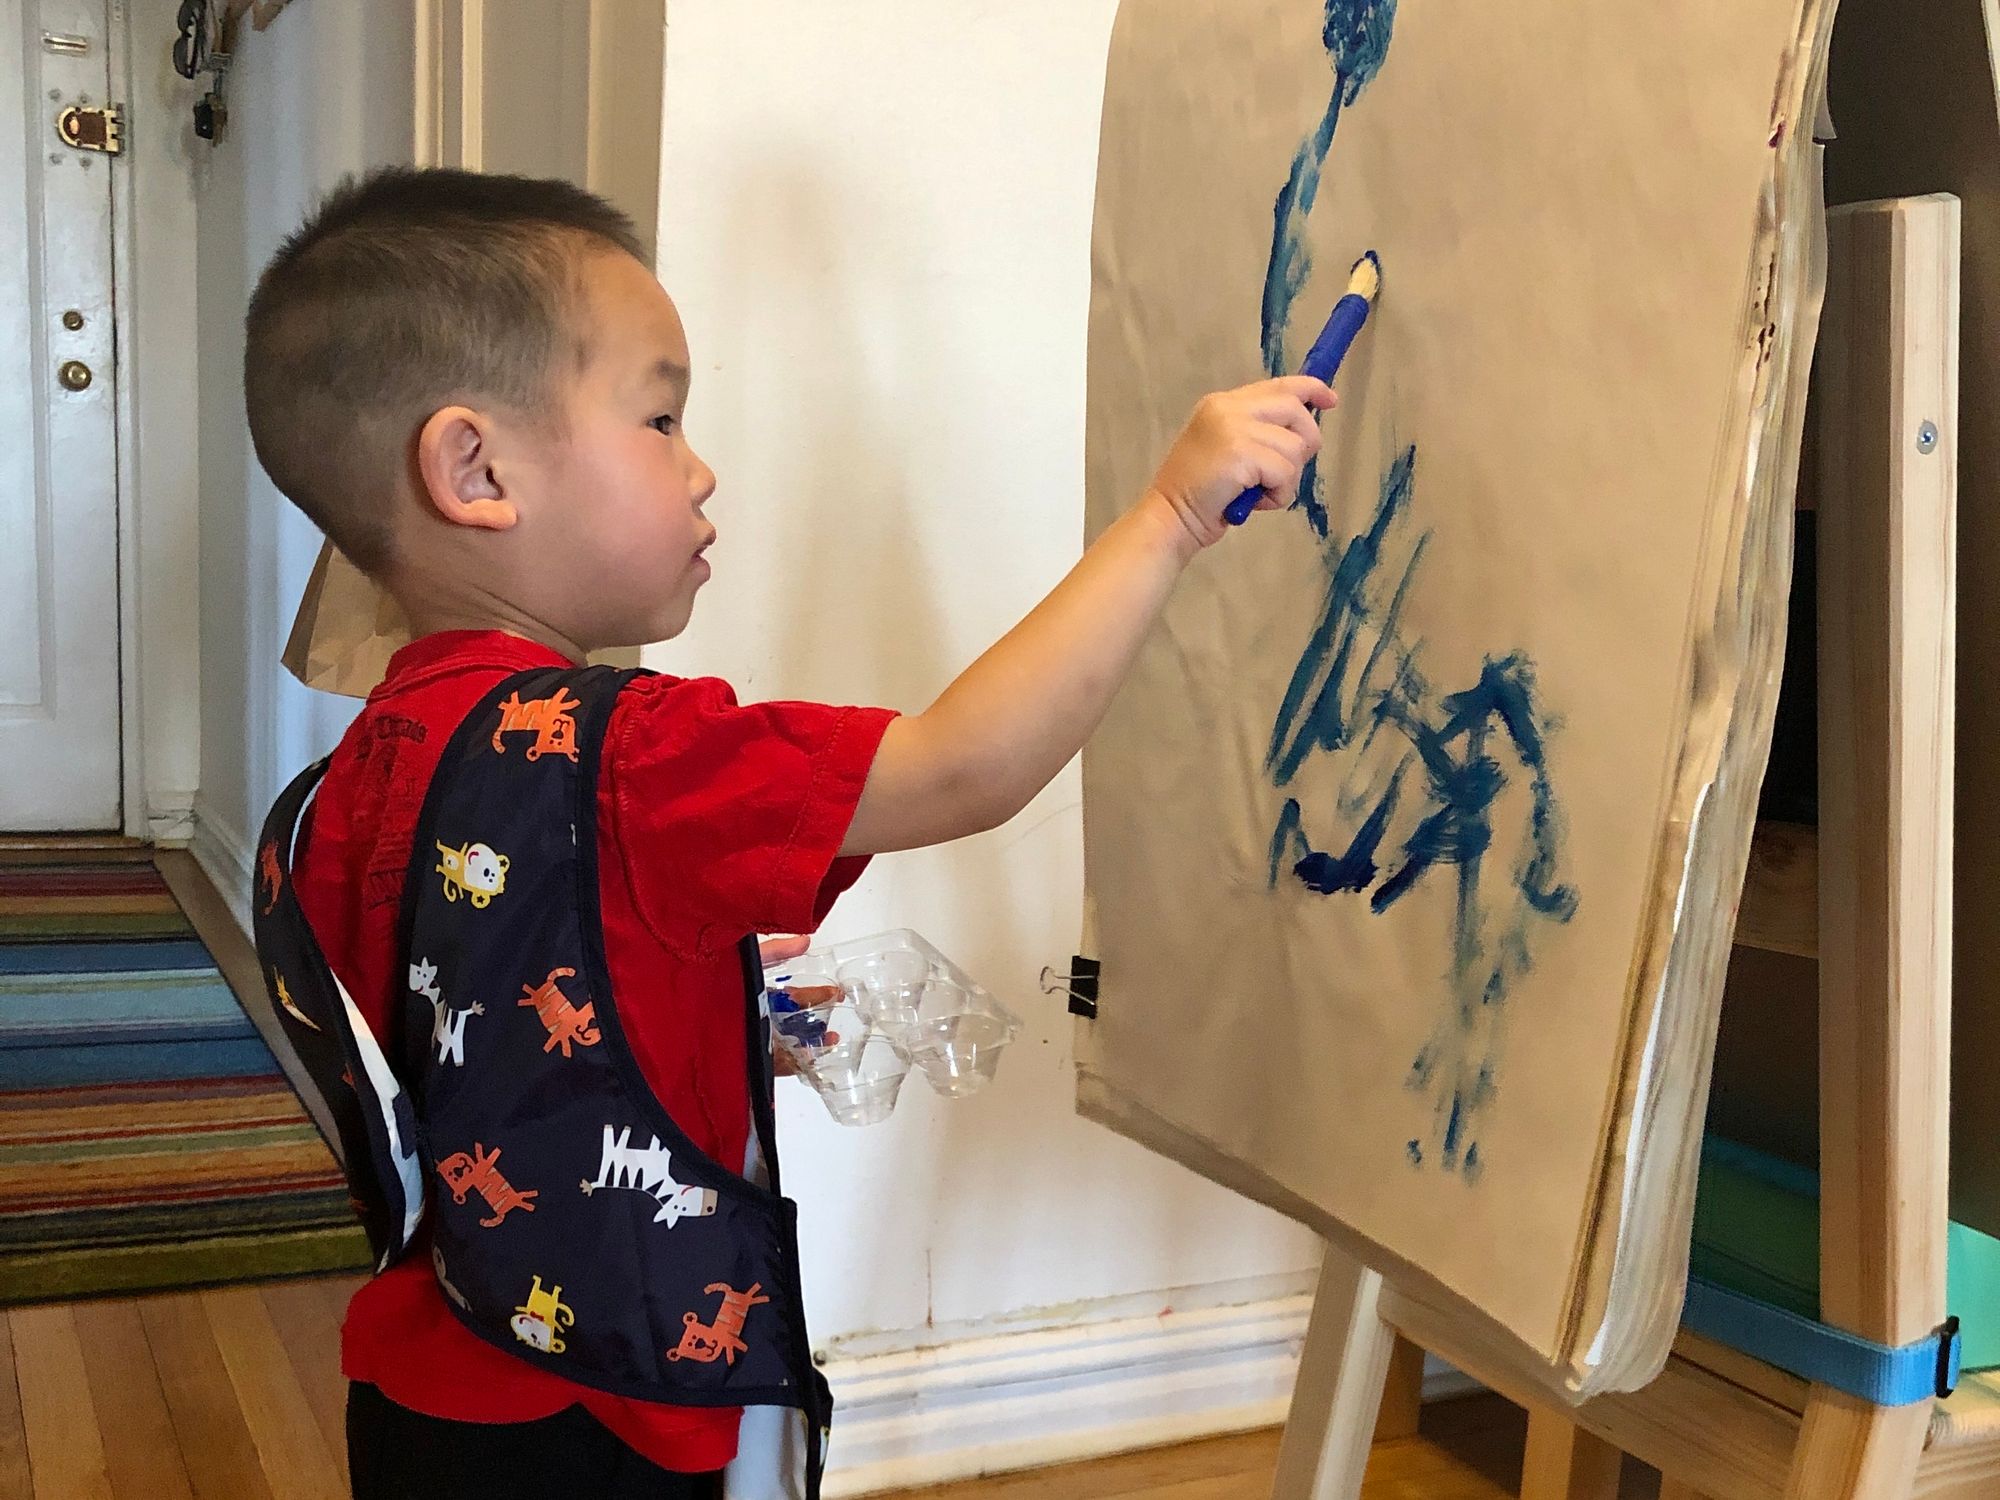 Toddler painting with paintbrush